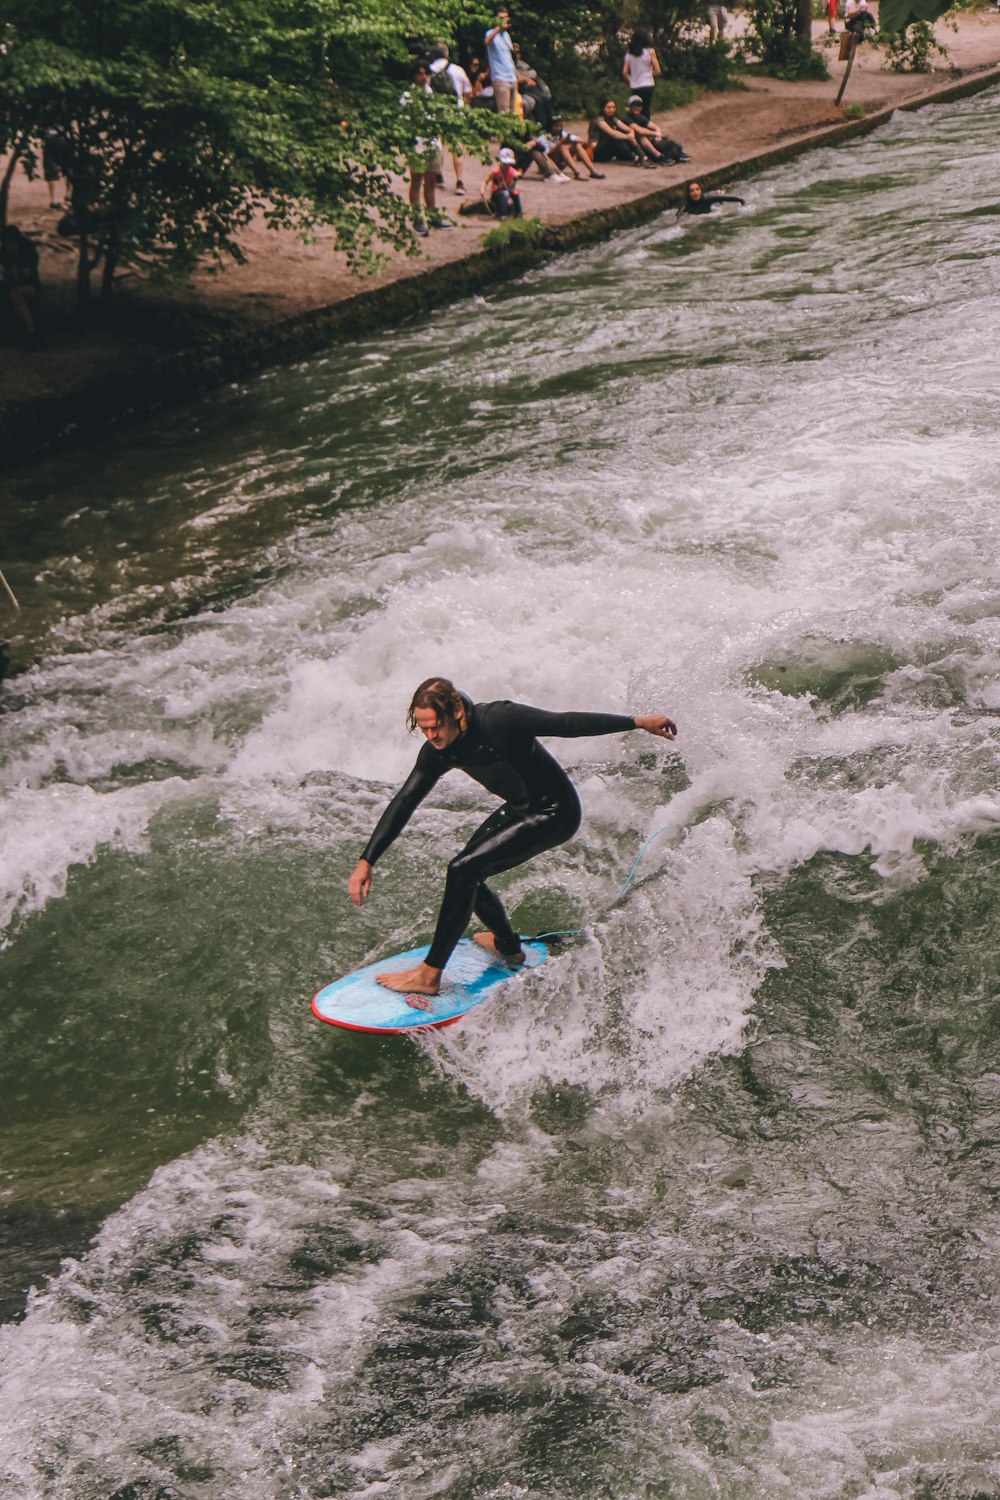 a man riding a surfboard on top of a river